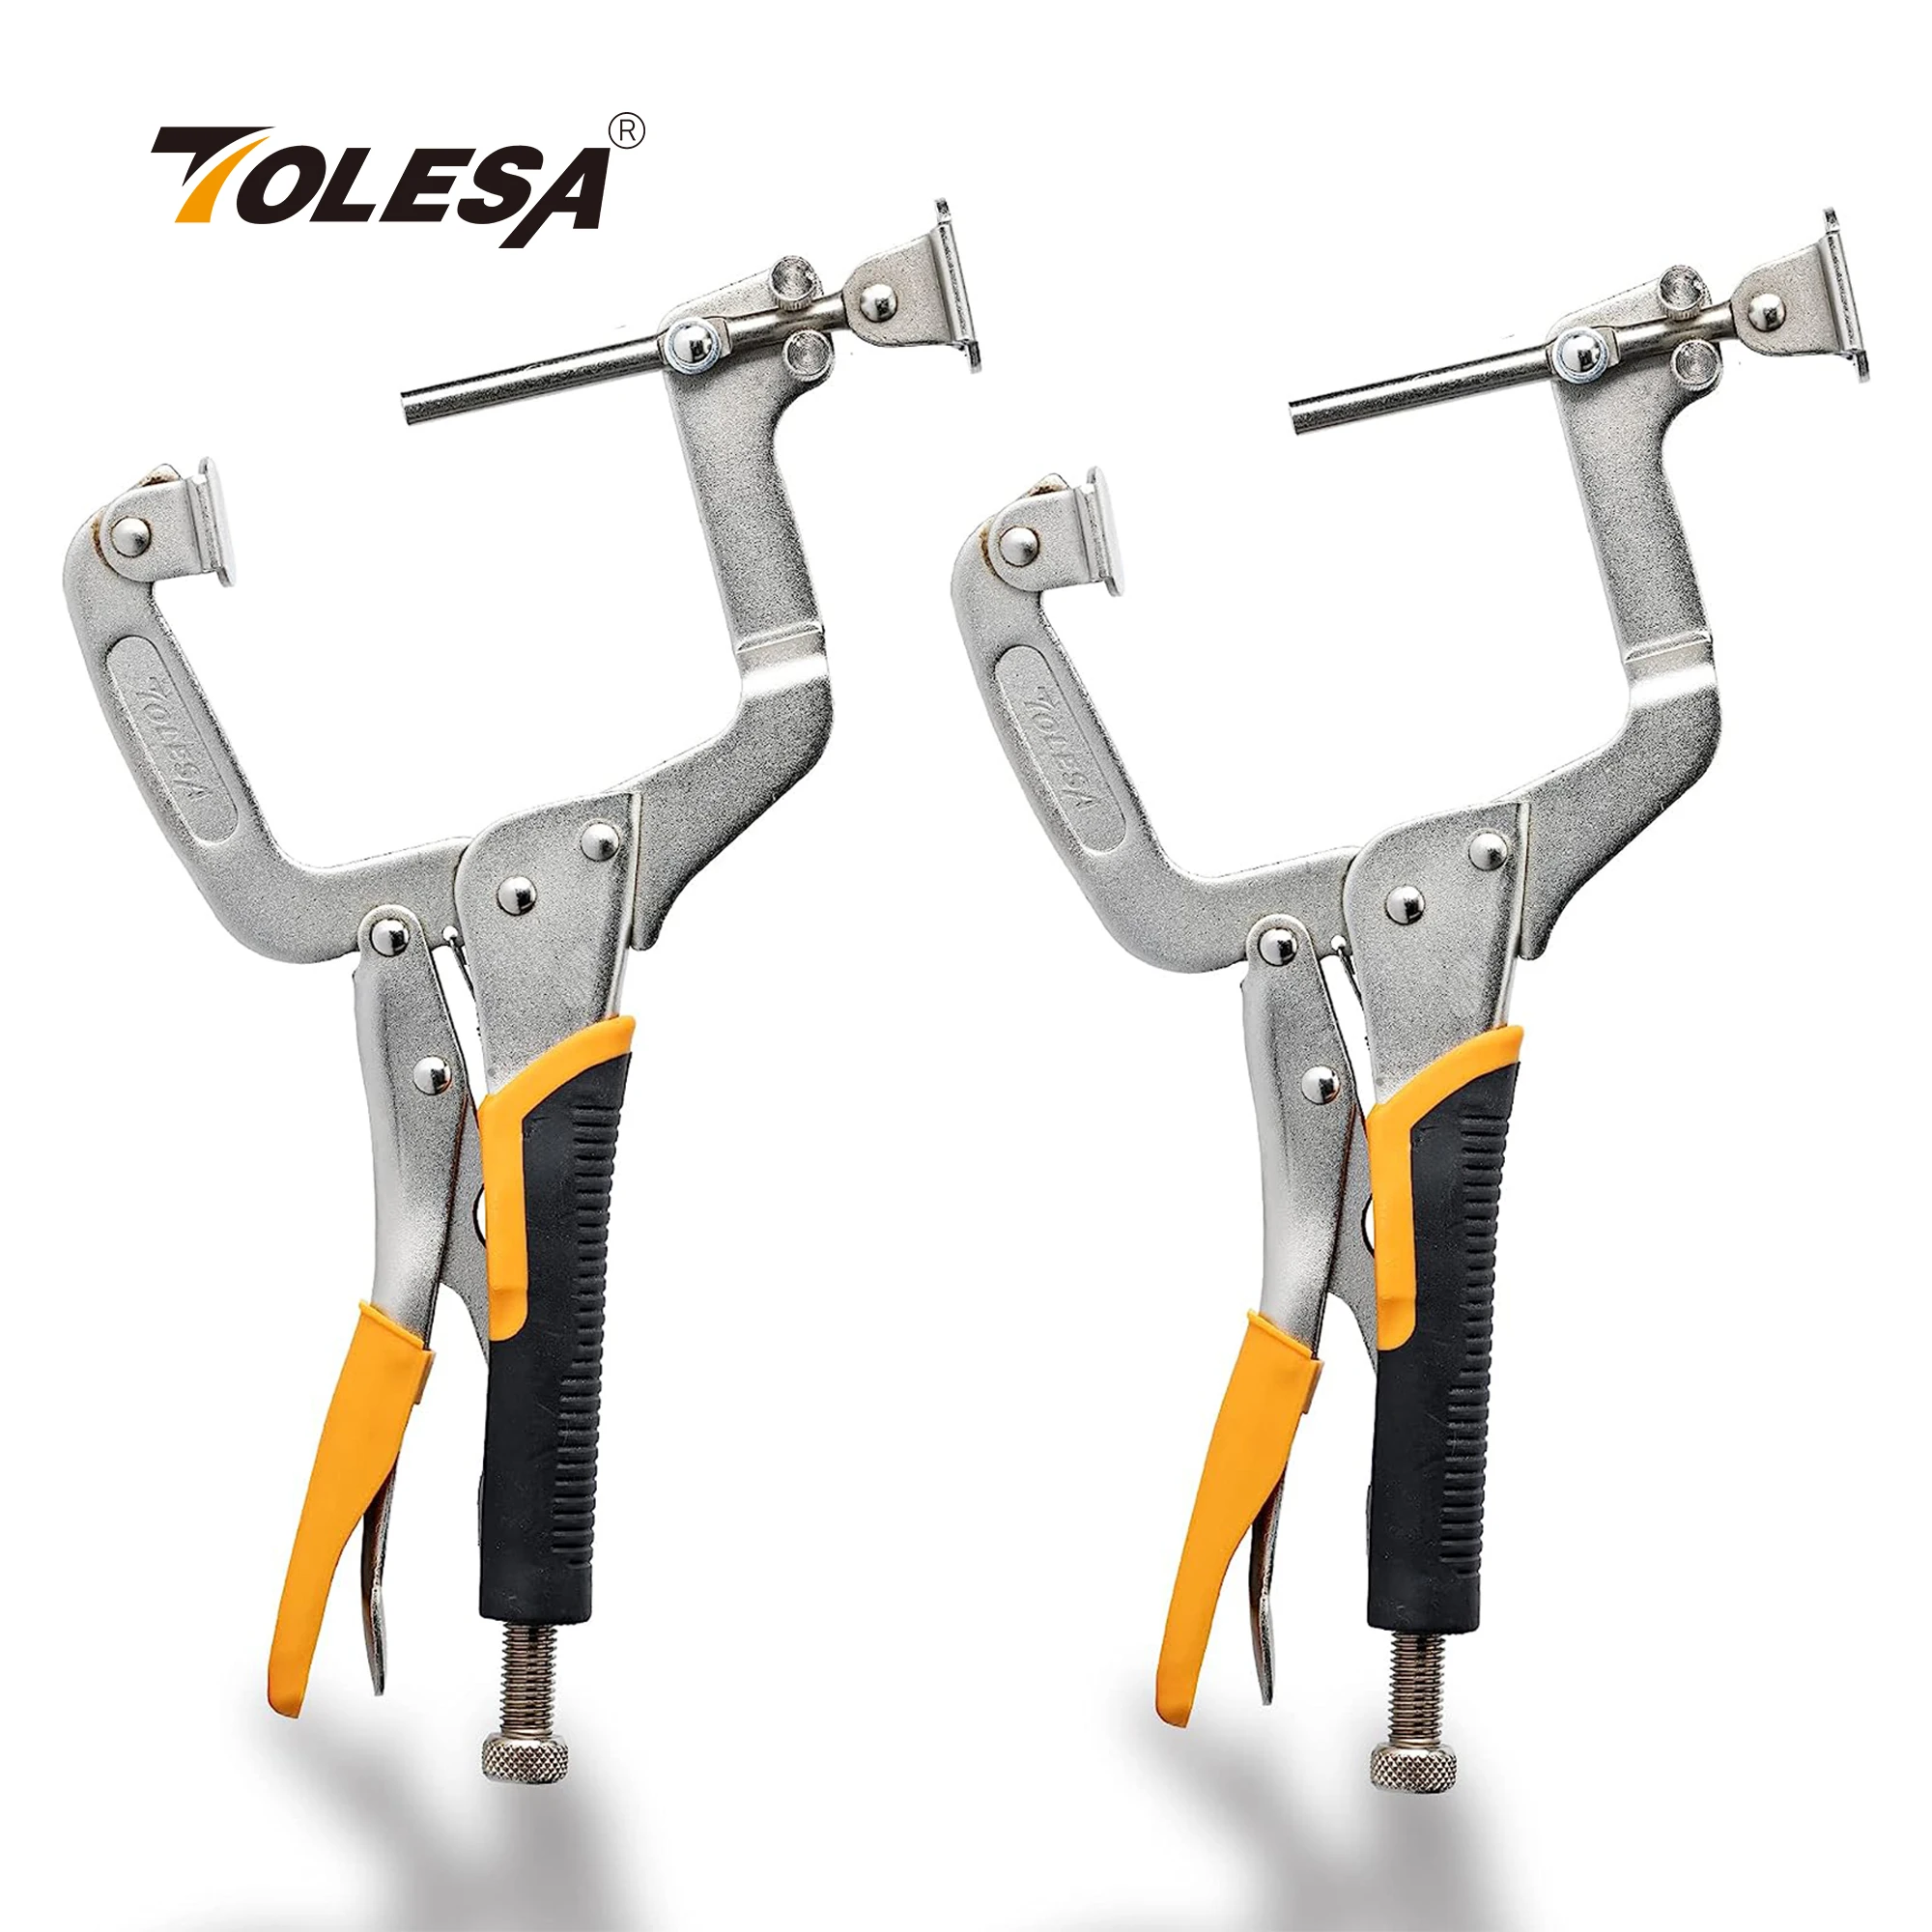 

TOLESA 2PCS 11'' Pocket Hole Clamps for Woodworking, 90 Degree Right Angle Clamps with 2 Ways Adjustable Pads Metal Face Clamps